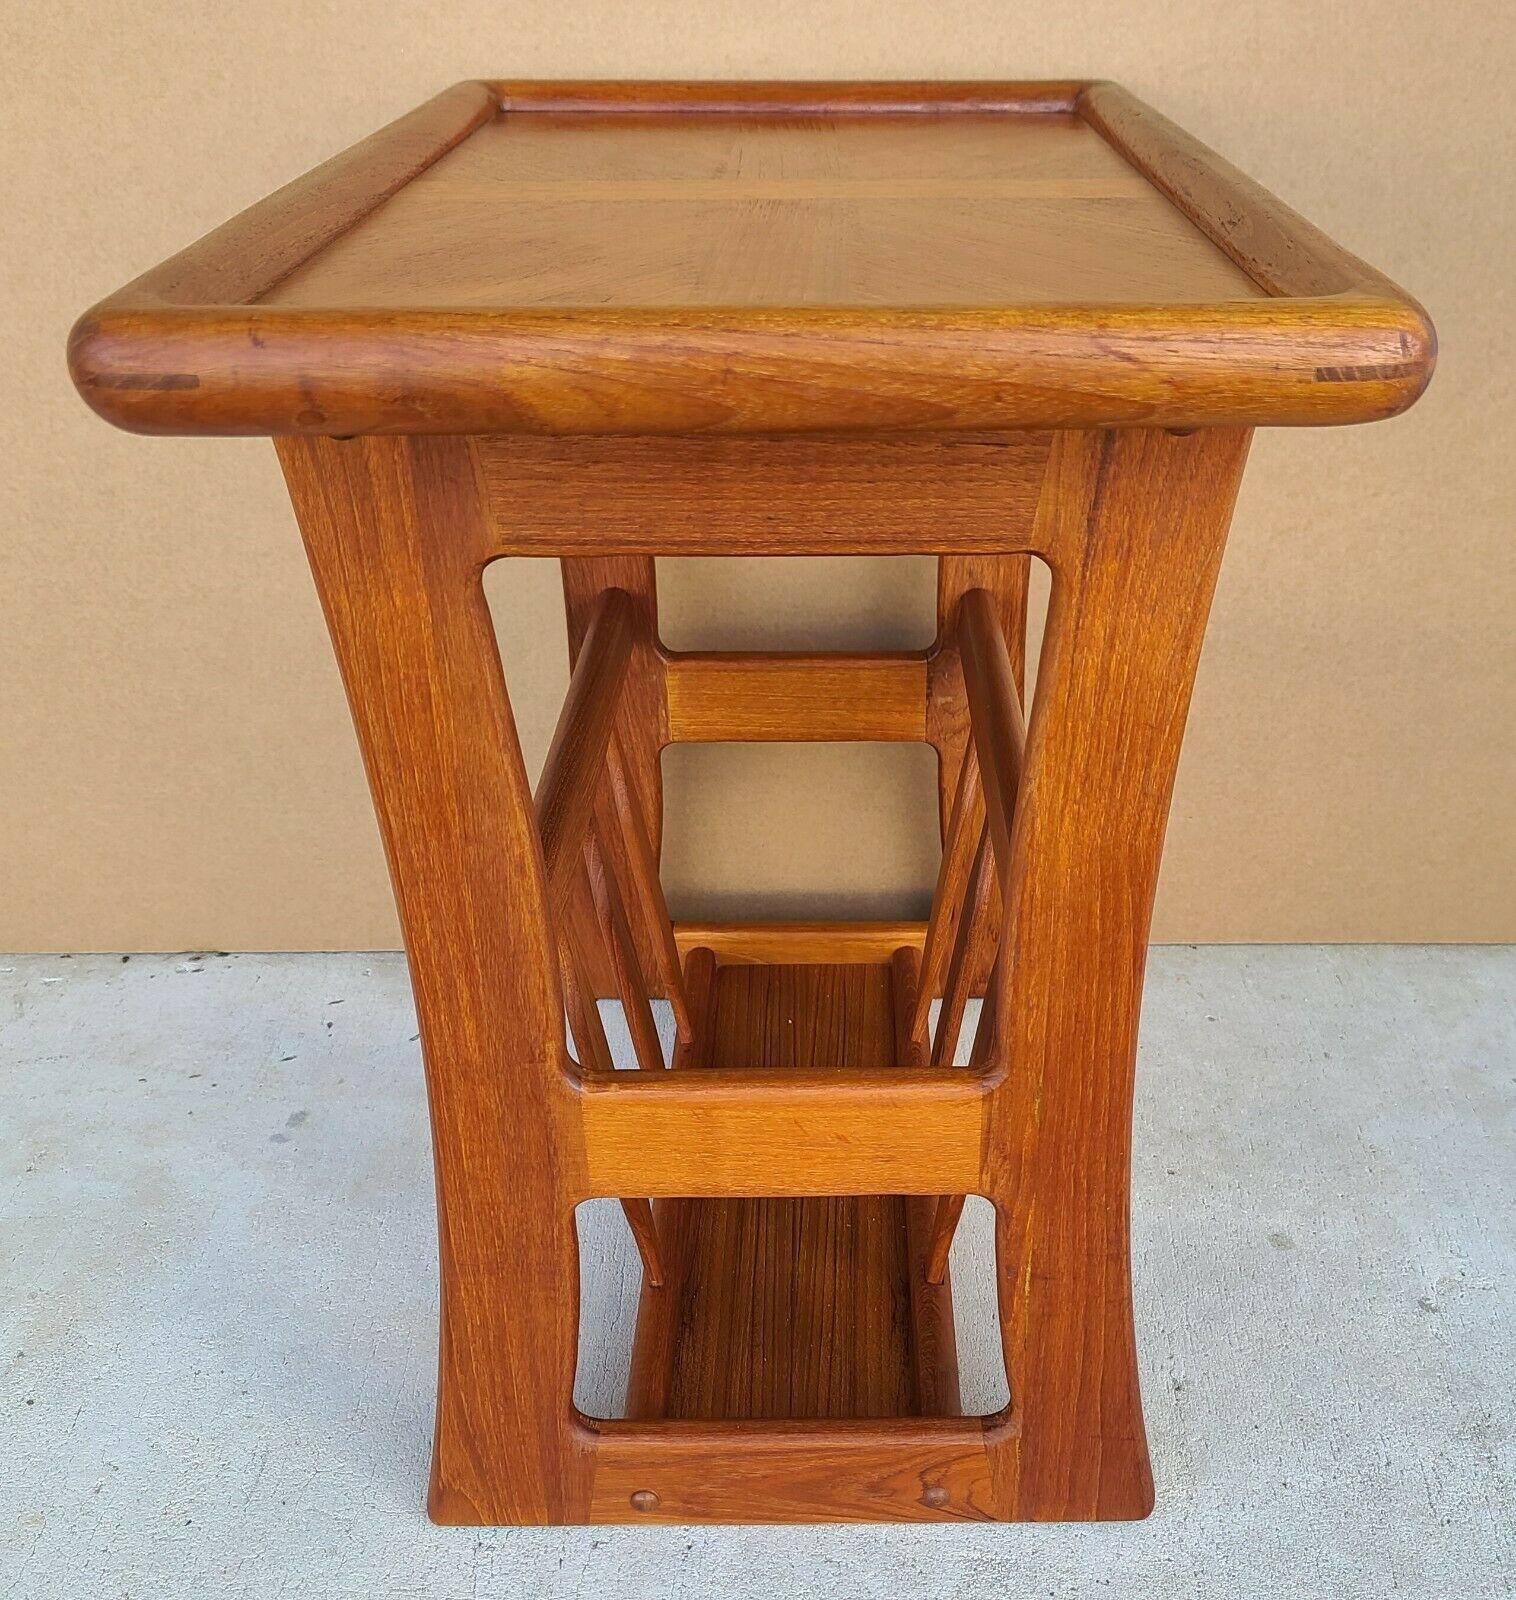 20th Century Danish Modern Solid Teak Side Table with Magazine Holder by Goodwood